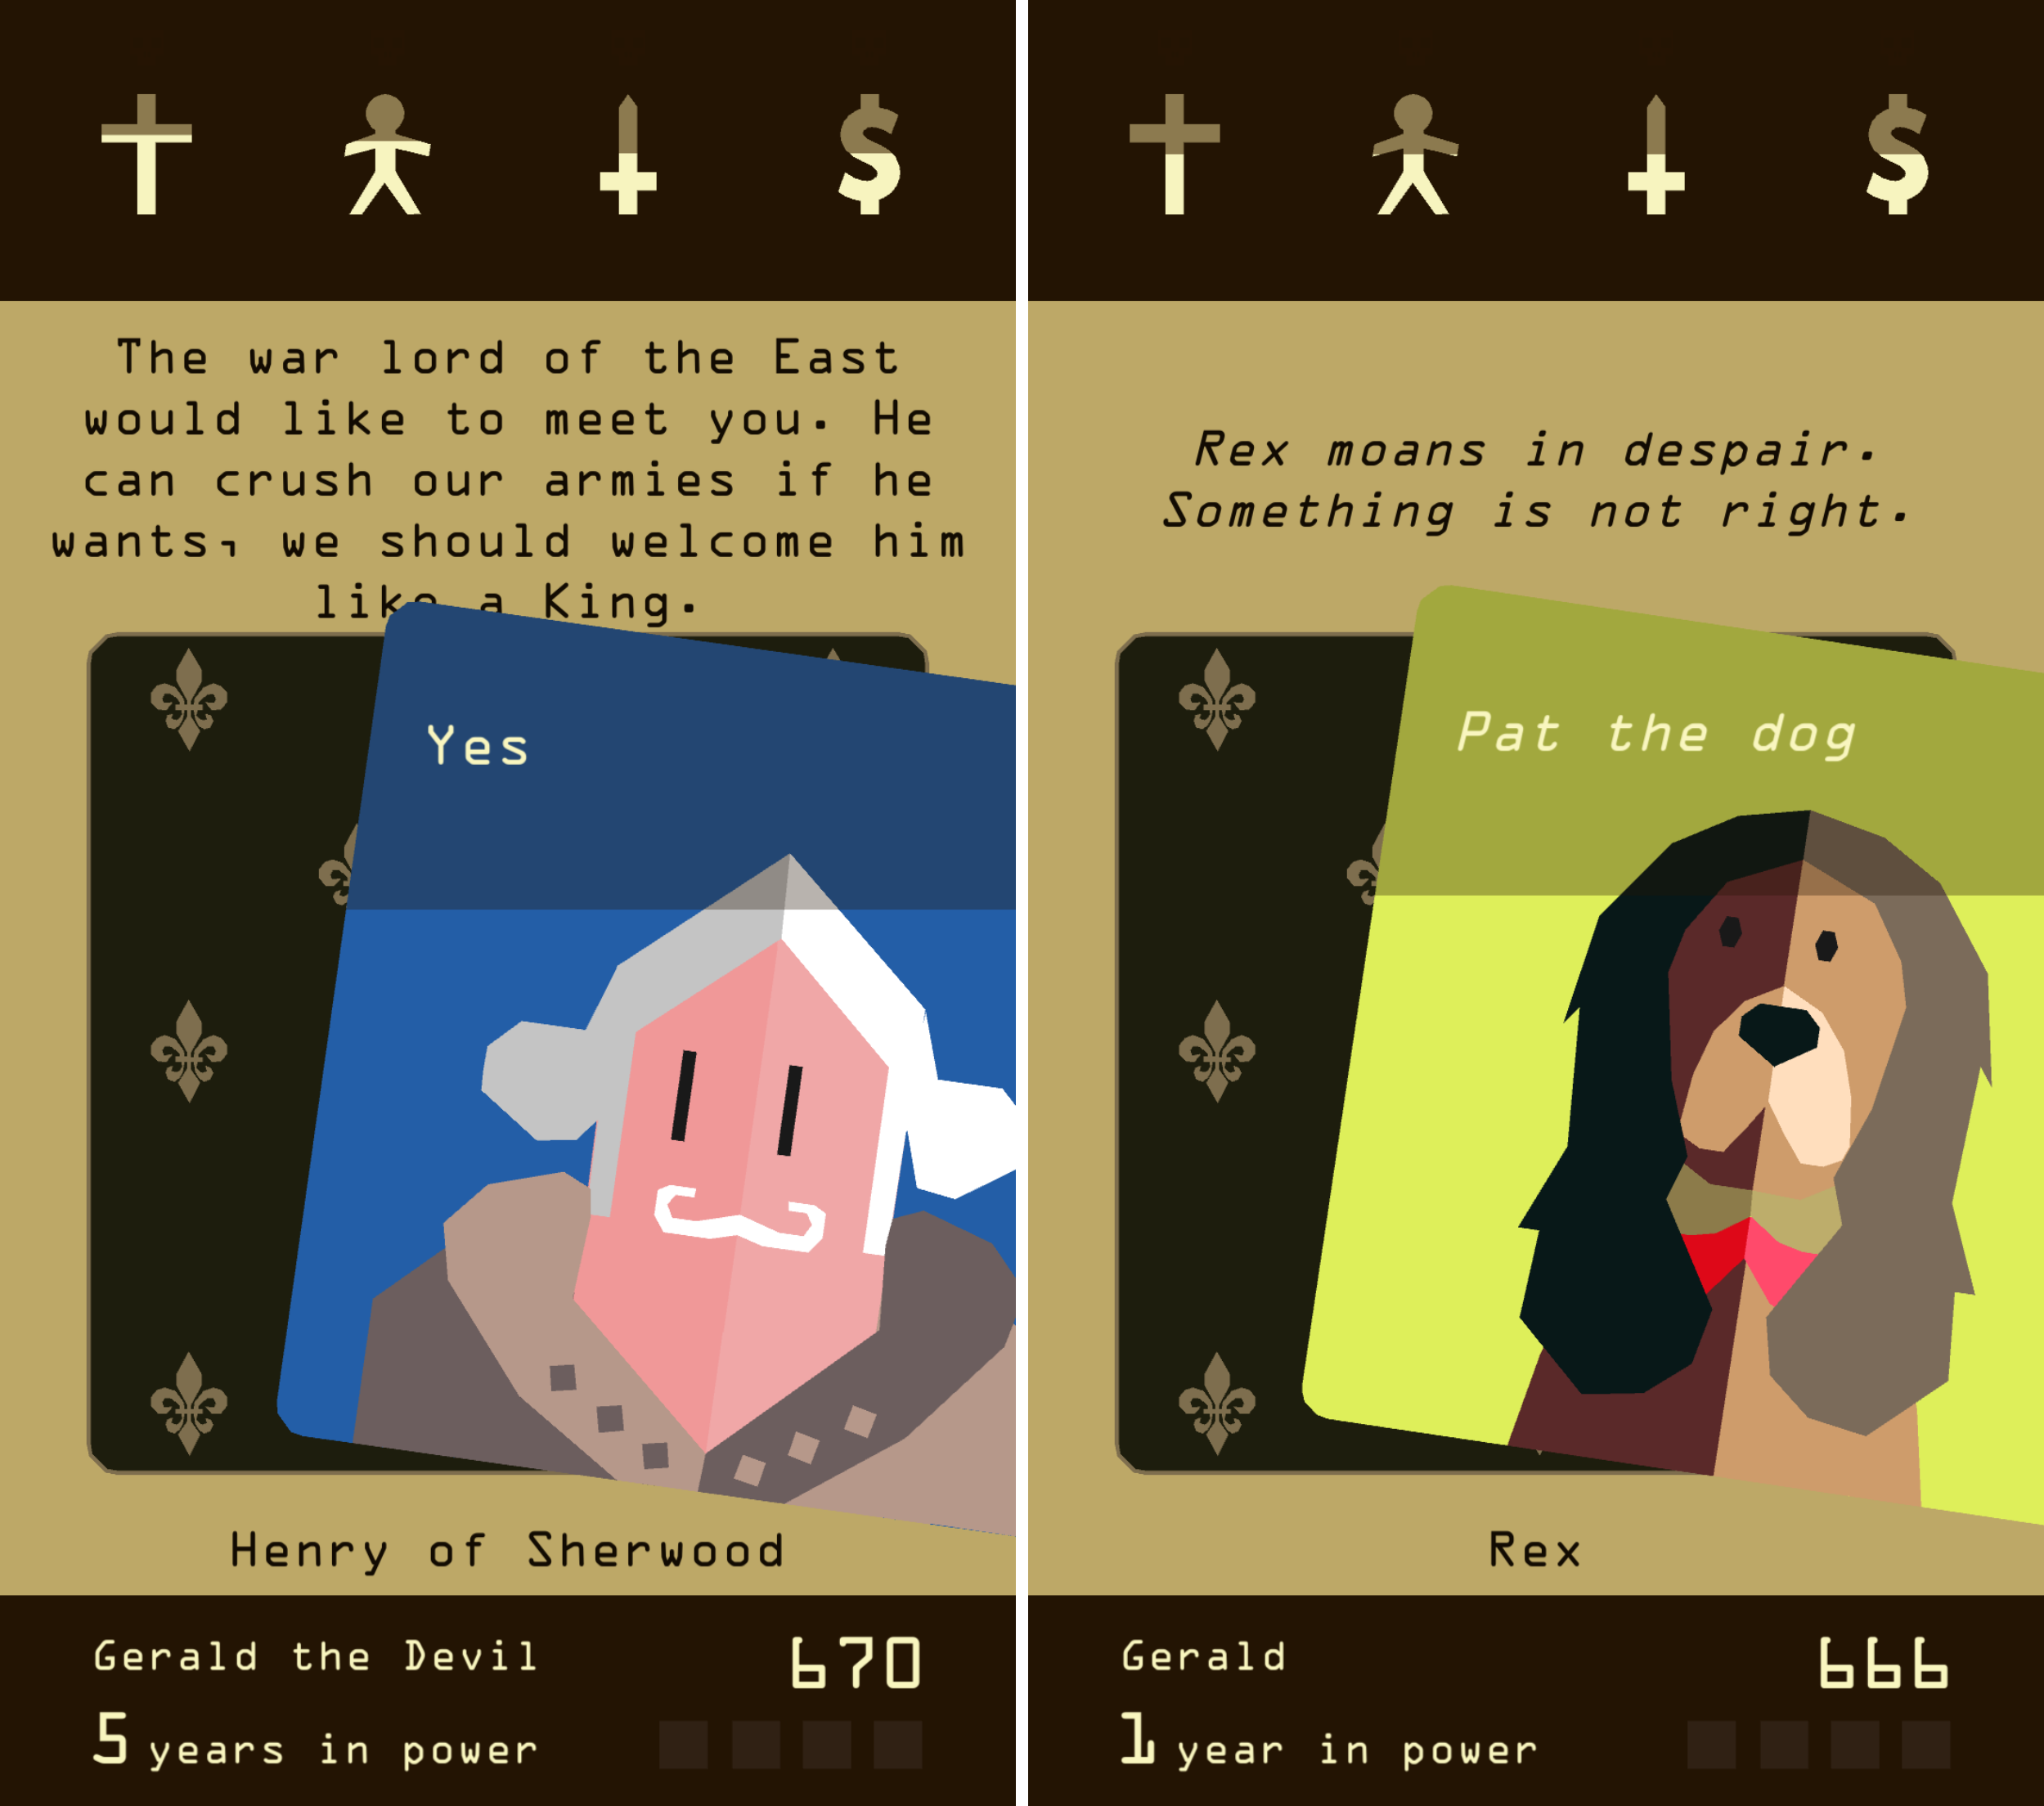 Reigns (£2.41)